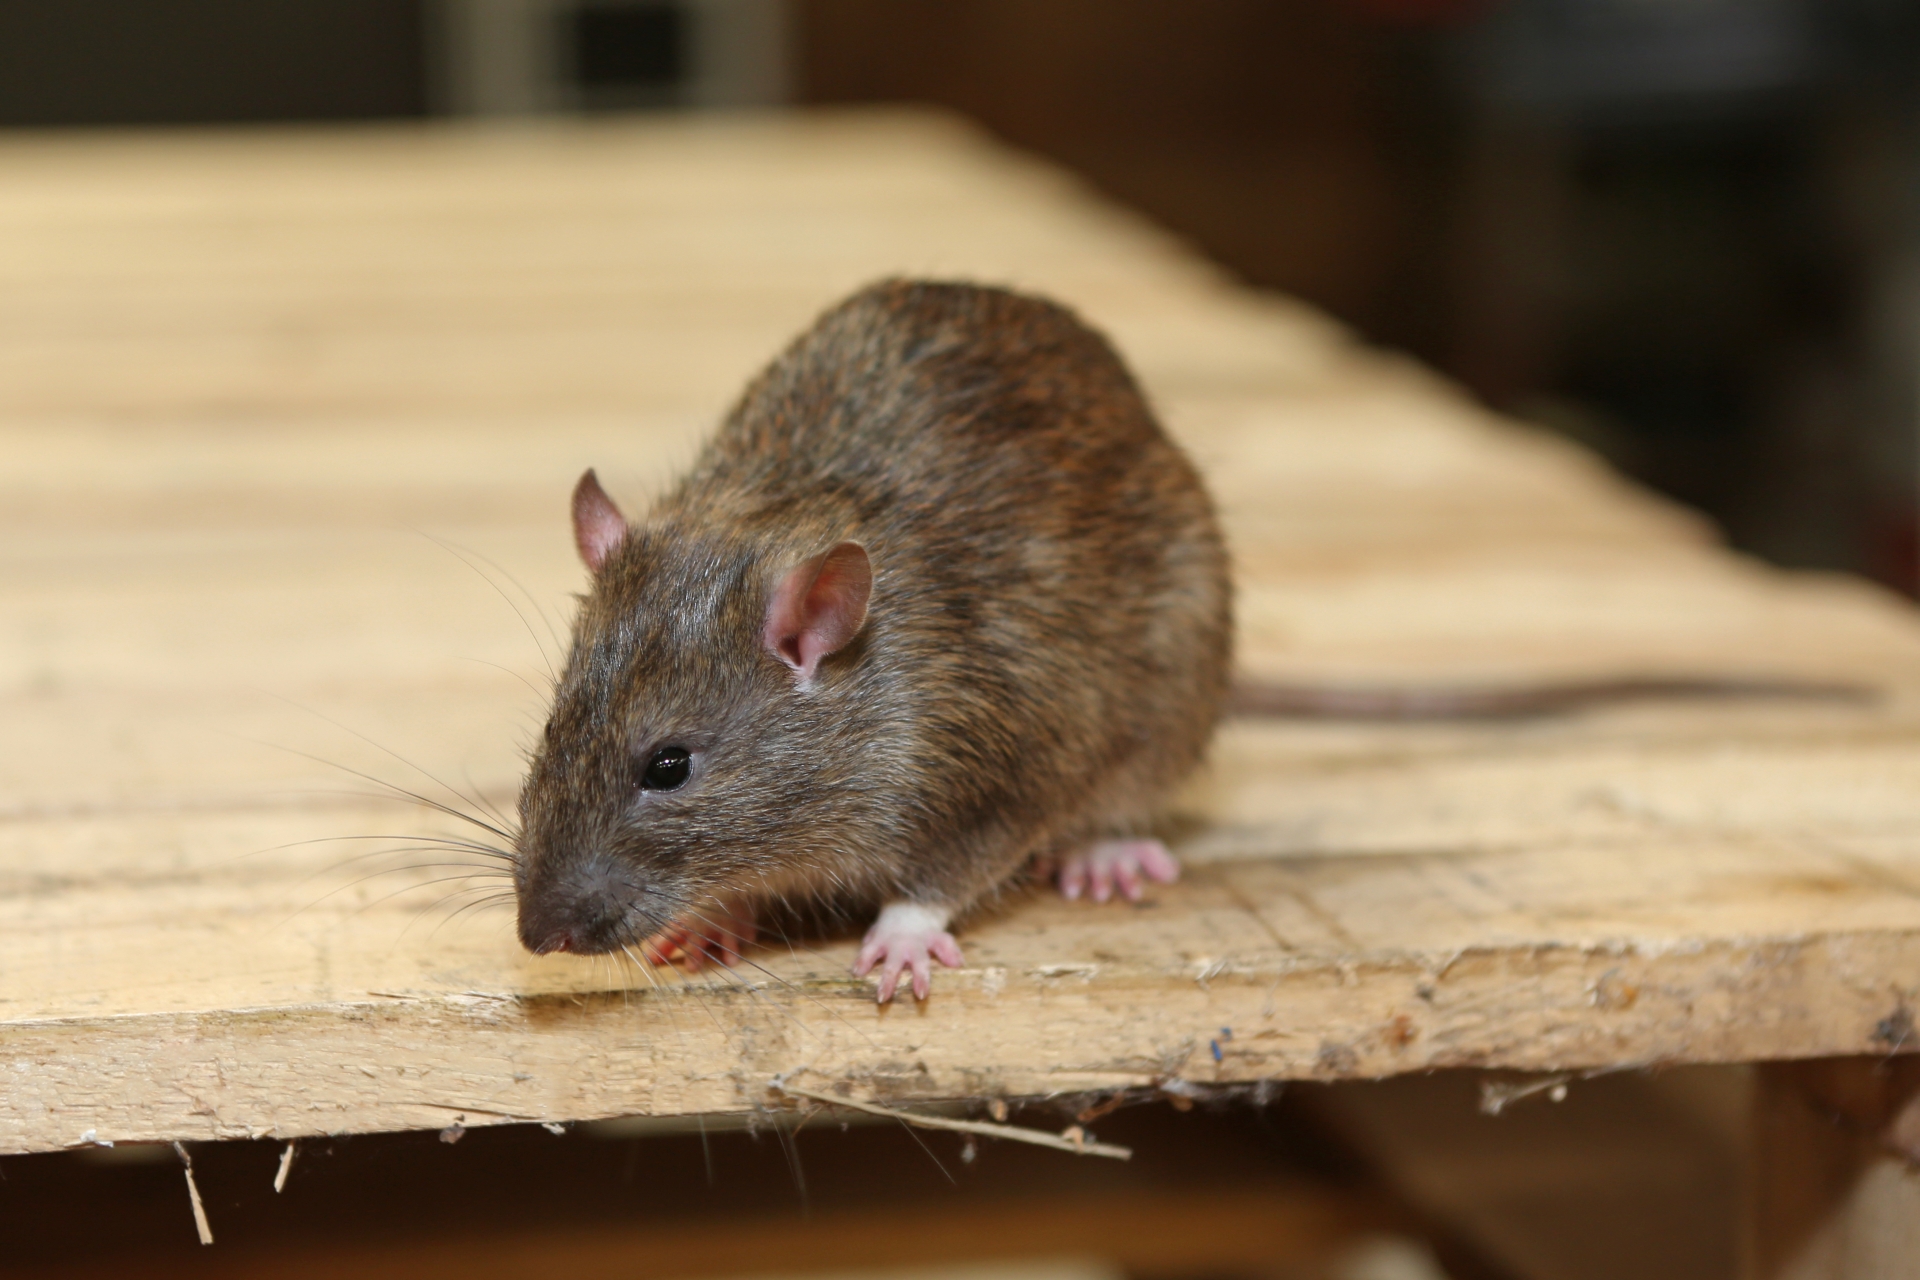 Rat extermination, Pest Control in Upminster, North Ockendon, RM14. Call Now 020 8166 9746